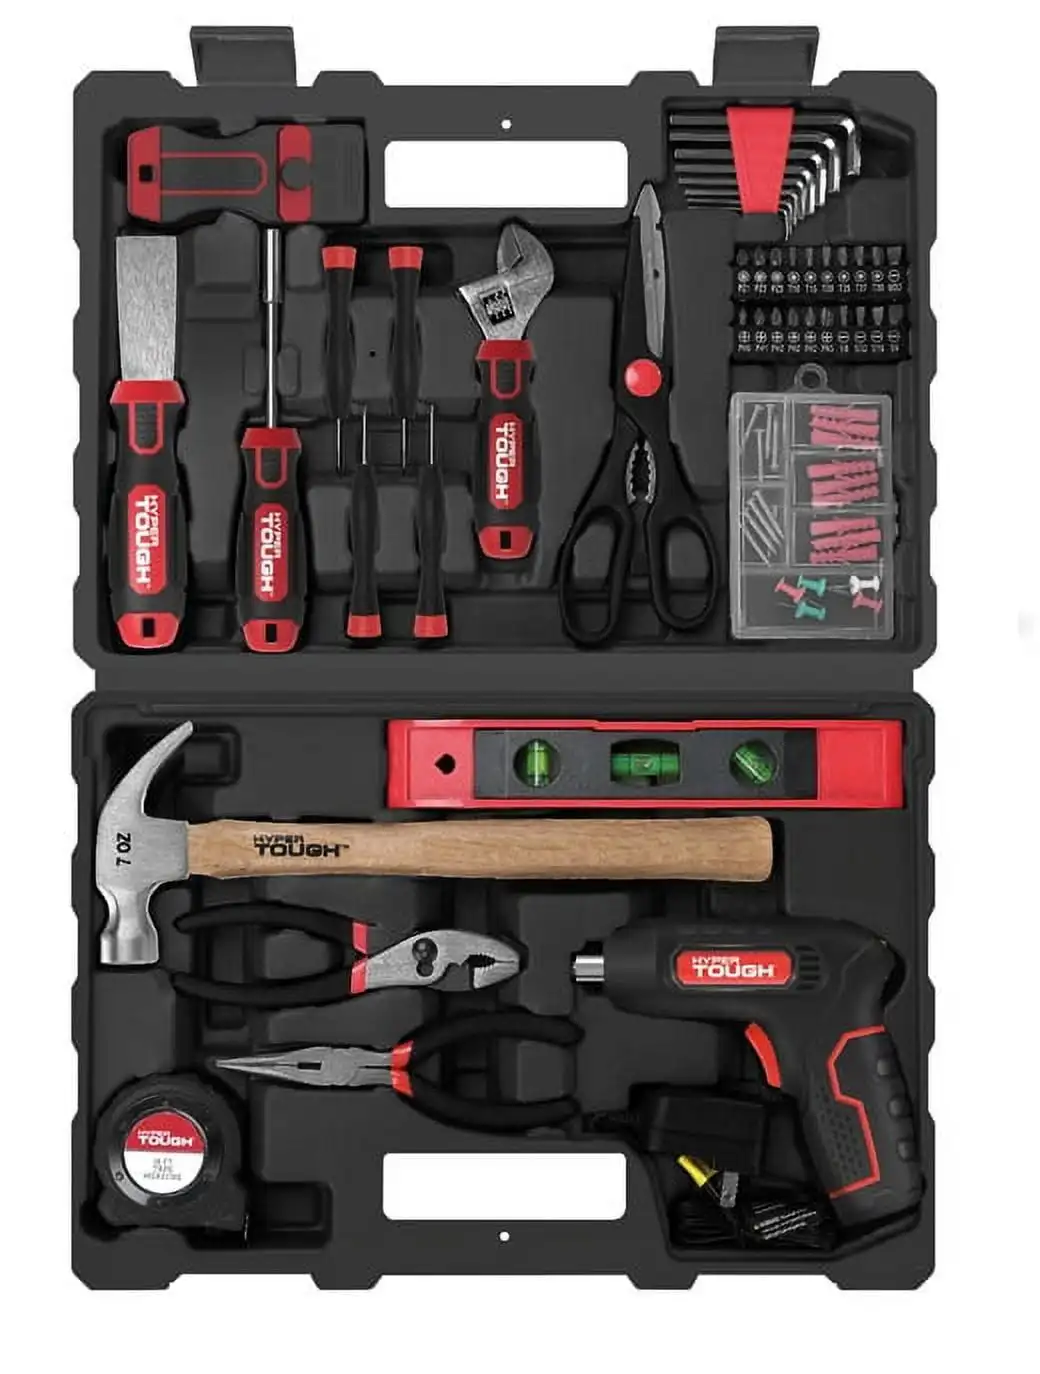 

Hyper Tough 45 PC Home Repair Tool Set with Scissors, Hex Keys and More, New condition